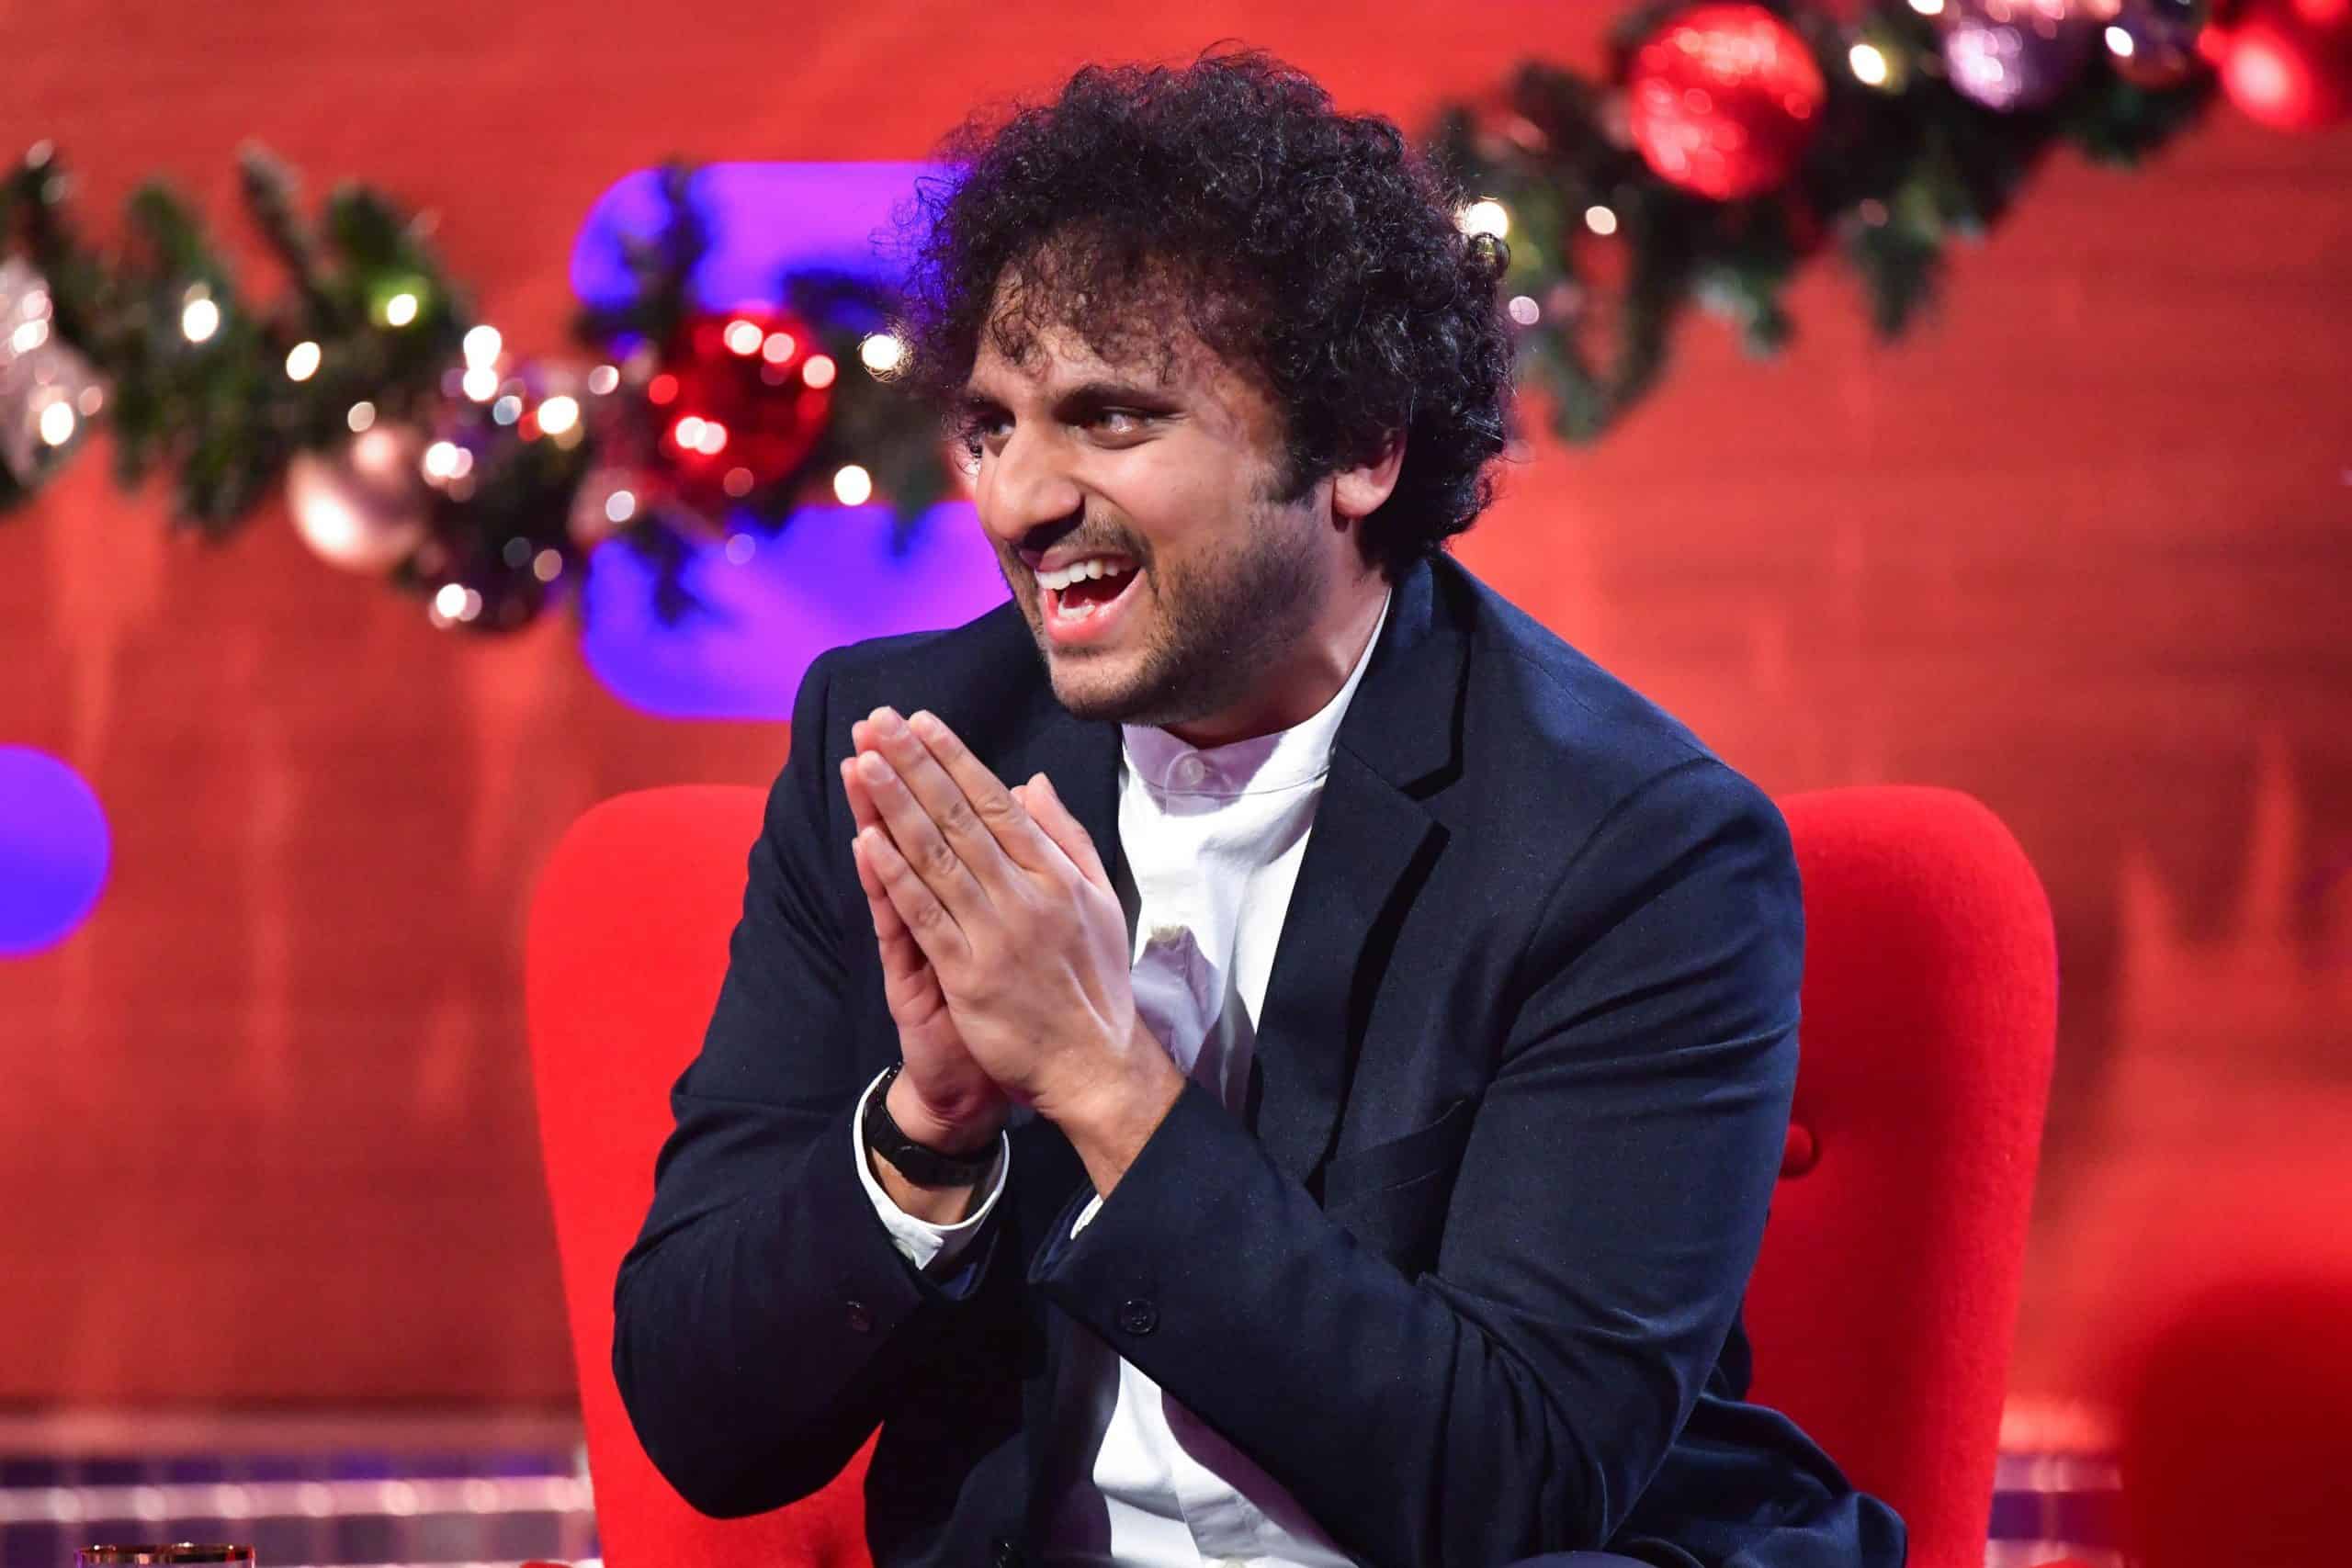 Watch: Nish Kumar jokes about BBC cancellation & compares himself to someone unexpected as show returns